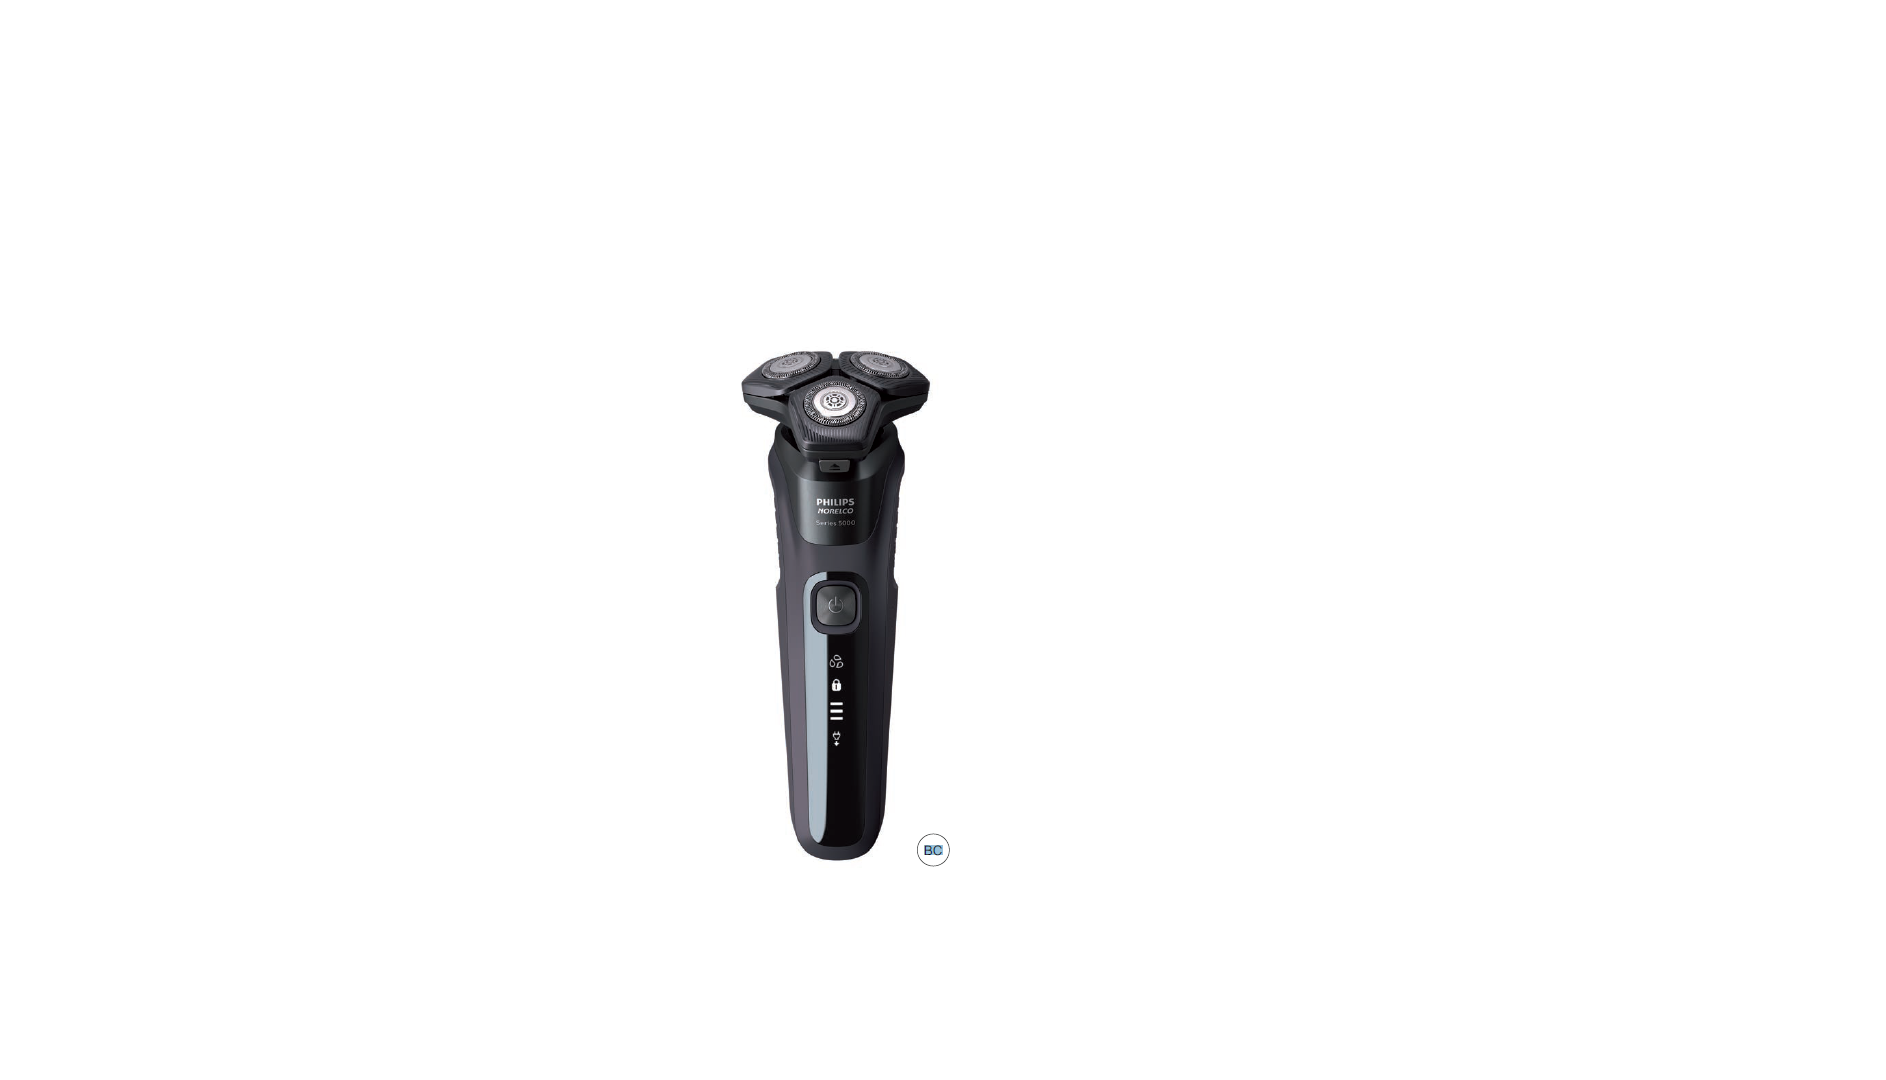 Philips Electric Shaver Series 5000 Fast & Protective featured